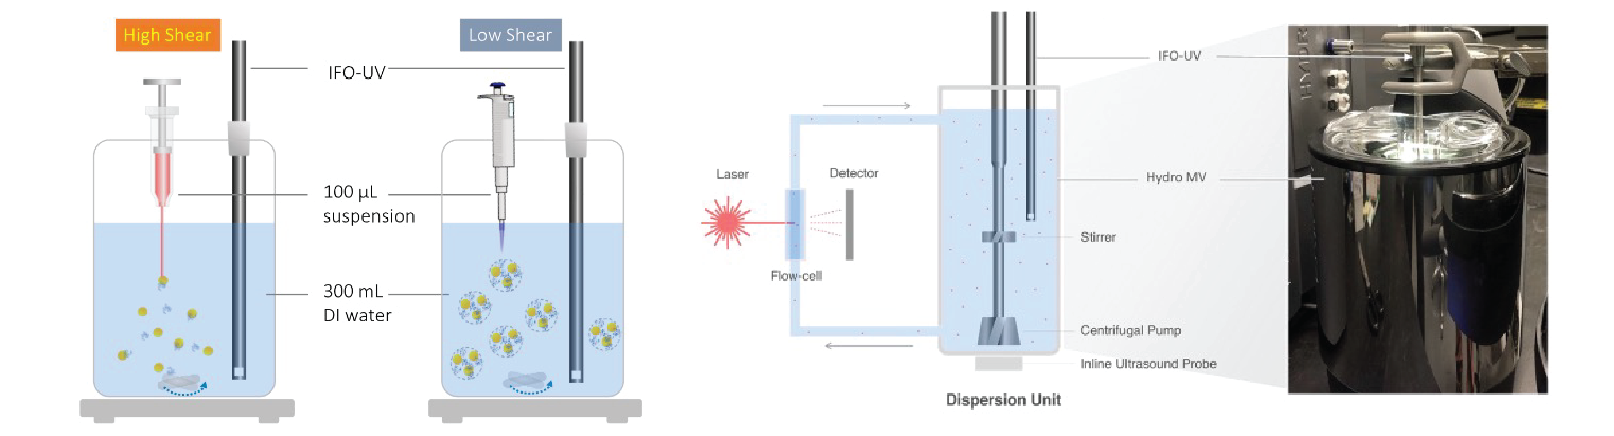 Figure 1. New methods to evaluate impact of particle size on drug dissolution in injectable suspensions